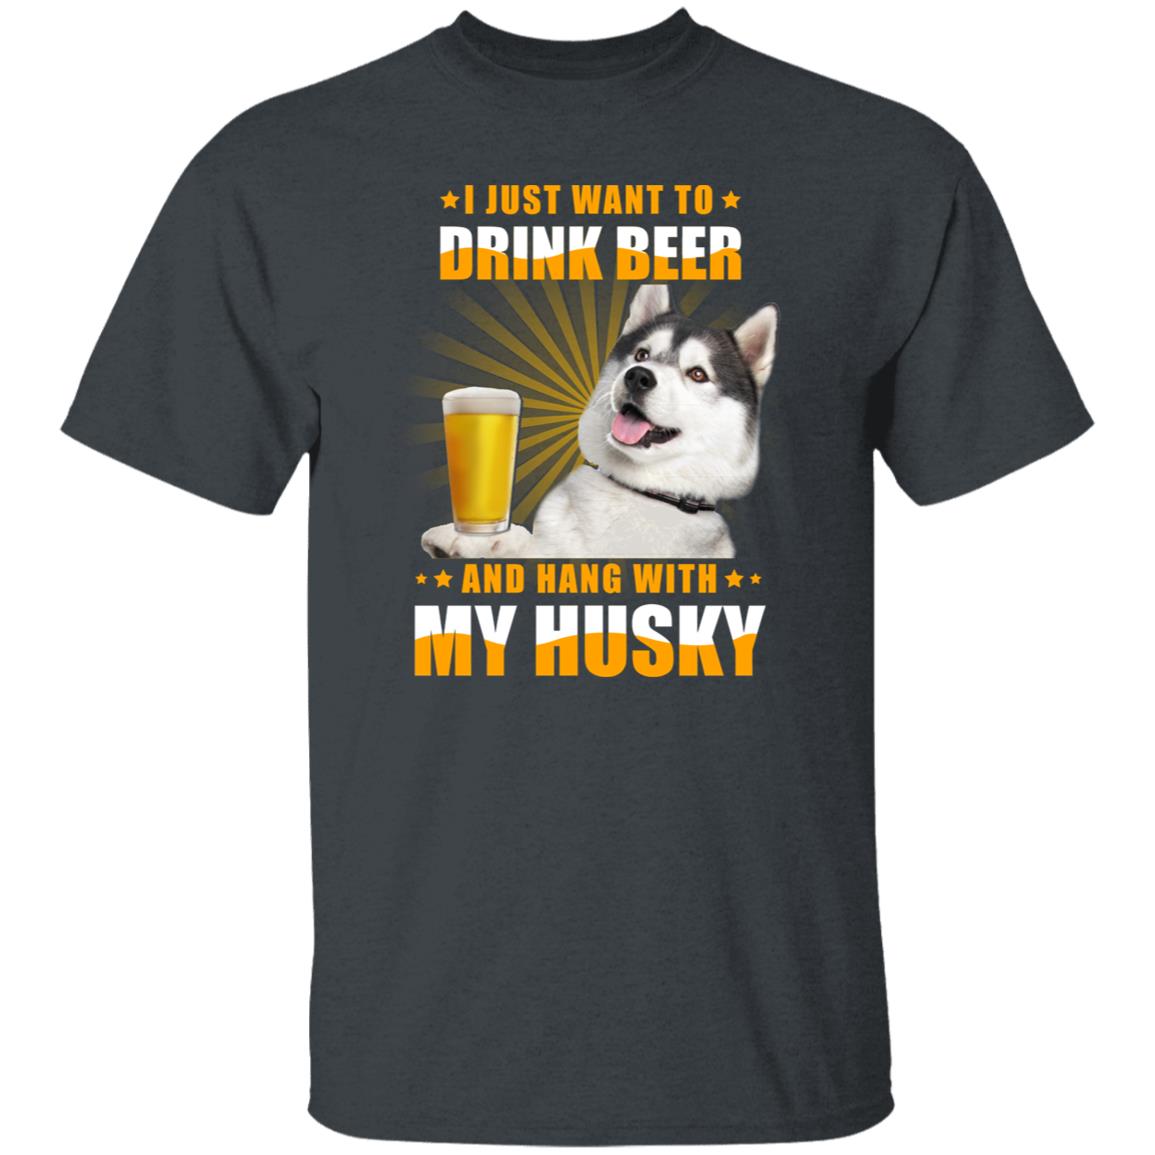 Husky owner T-Shirt gift I just want to drink beer Dog mom Unisex tee Black Navy Dark Heather-Dark Heather-Family-Gift-Planet